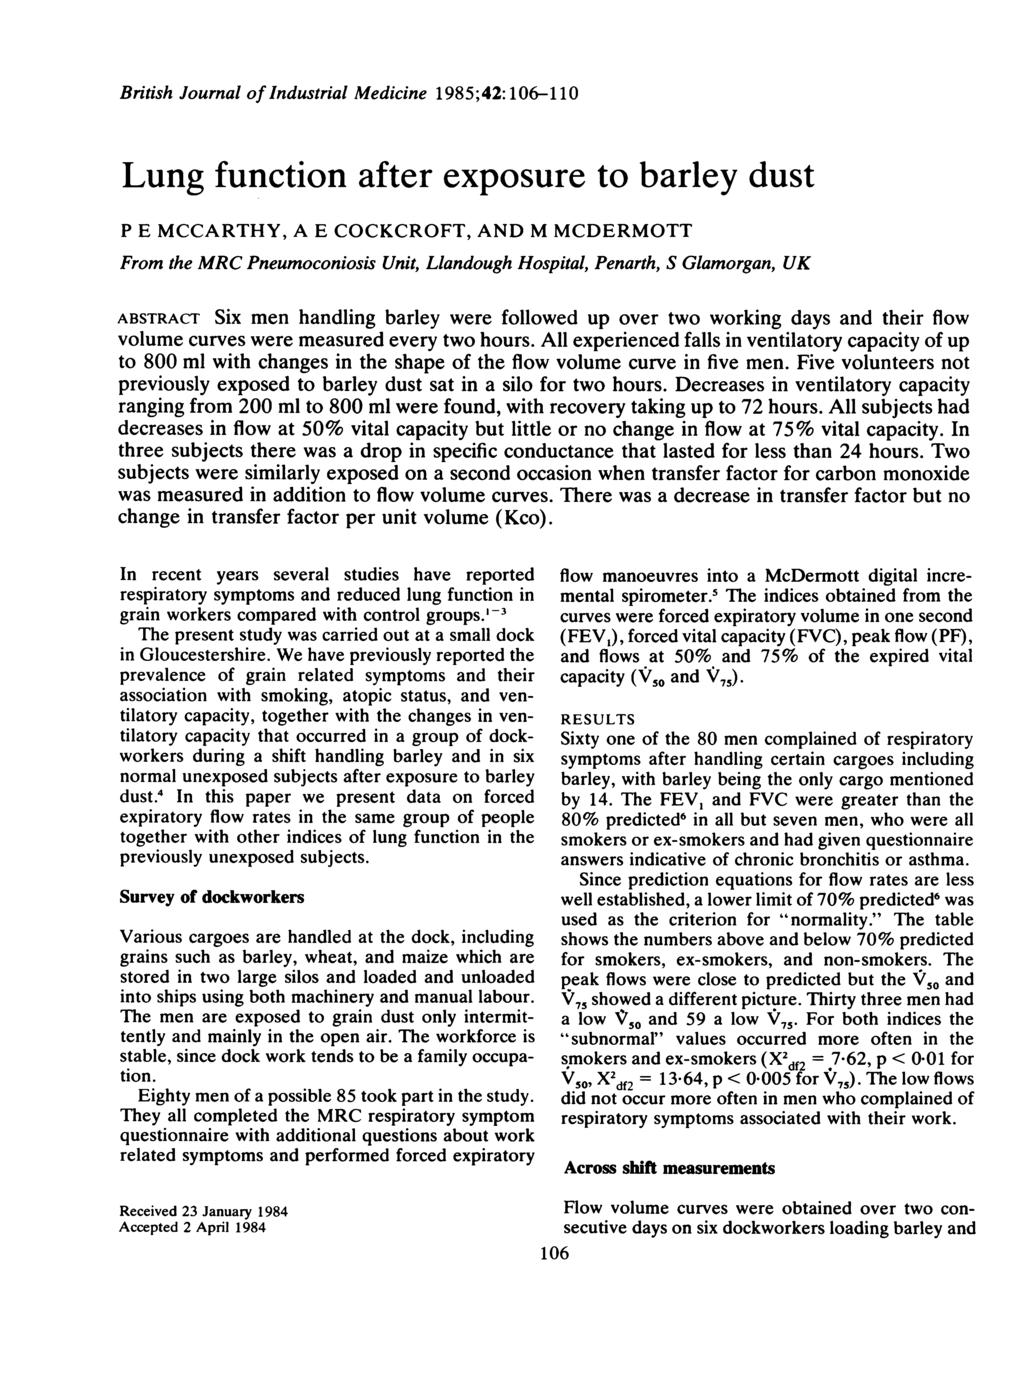 British Journal of Industrial Medicine 1 985; 4: 106-1 1 0 Lung function after exposure to barley dust P E MCCARTHY, A E COCKCROFT, AND M MCDERMOTT From the MRC Pneumoconiosis Unit, Llandough